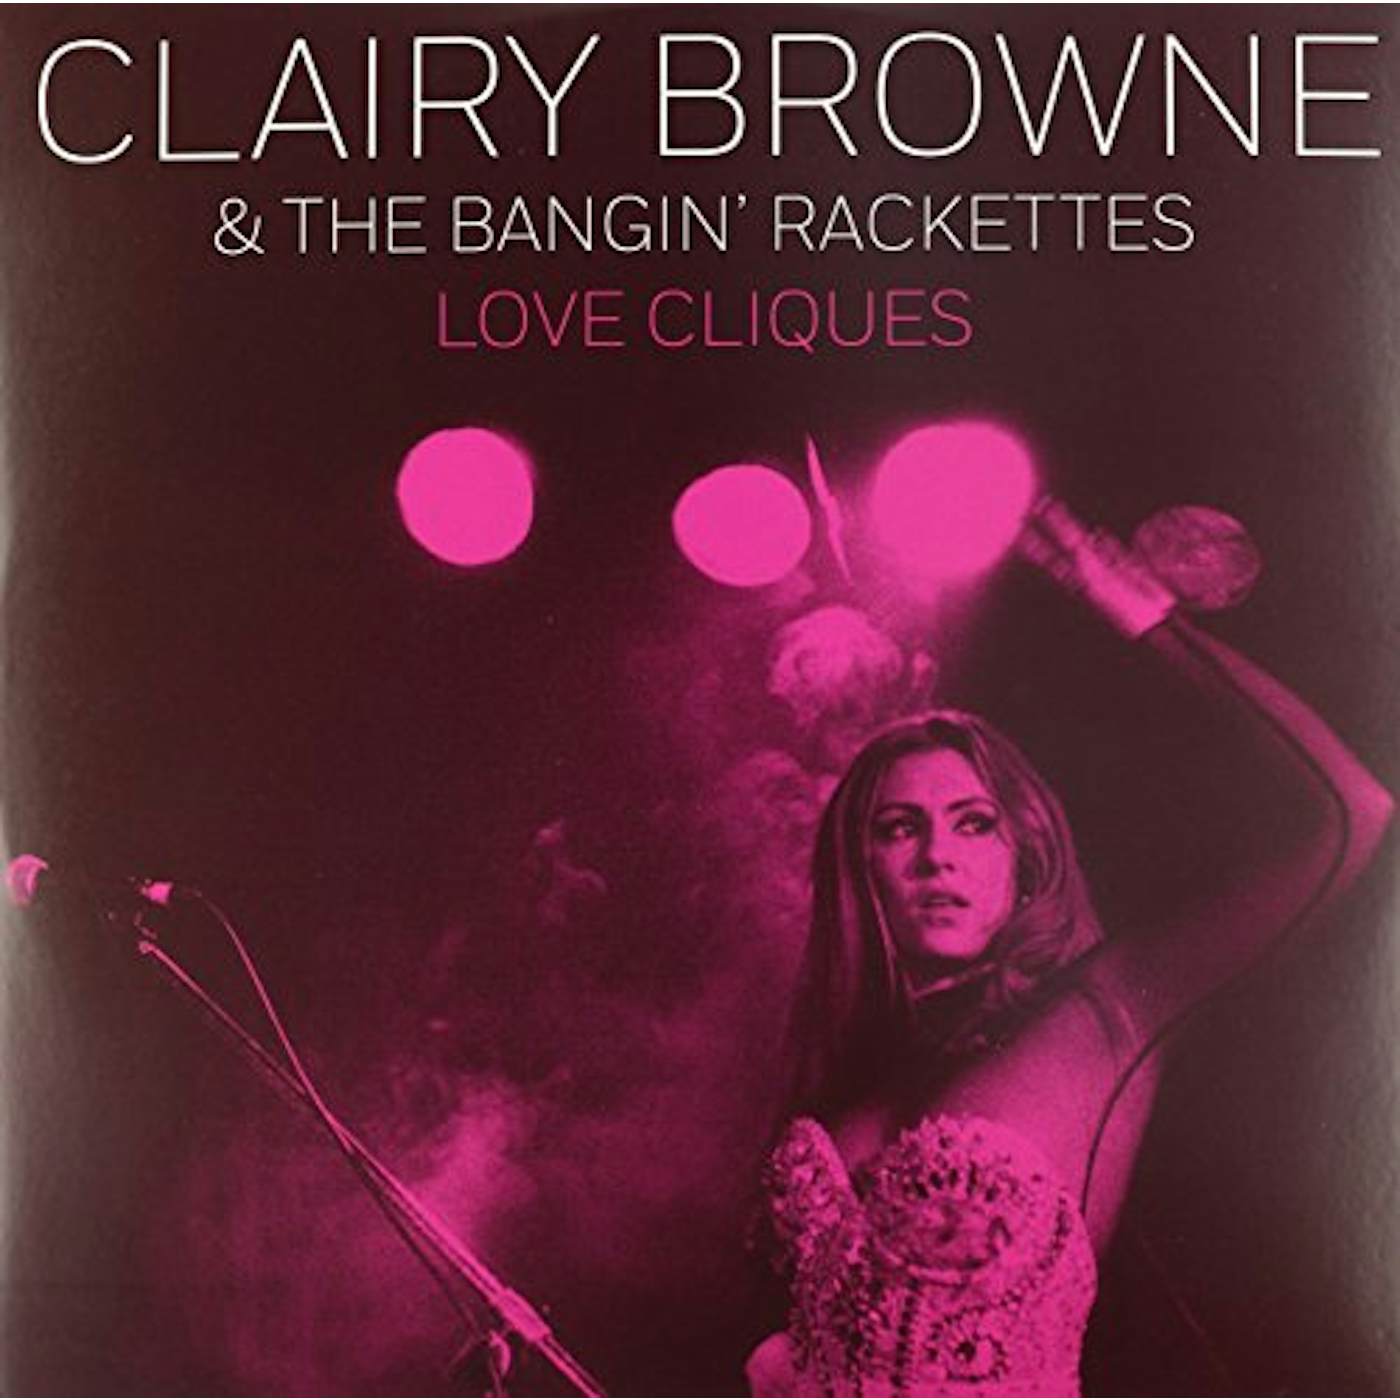 Clairy Browne & The Bangin' Rackettes Love Cliques Vinyl Record